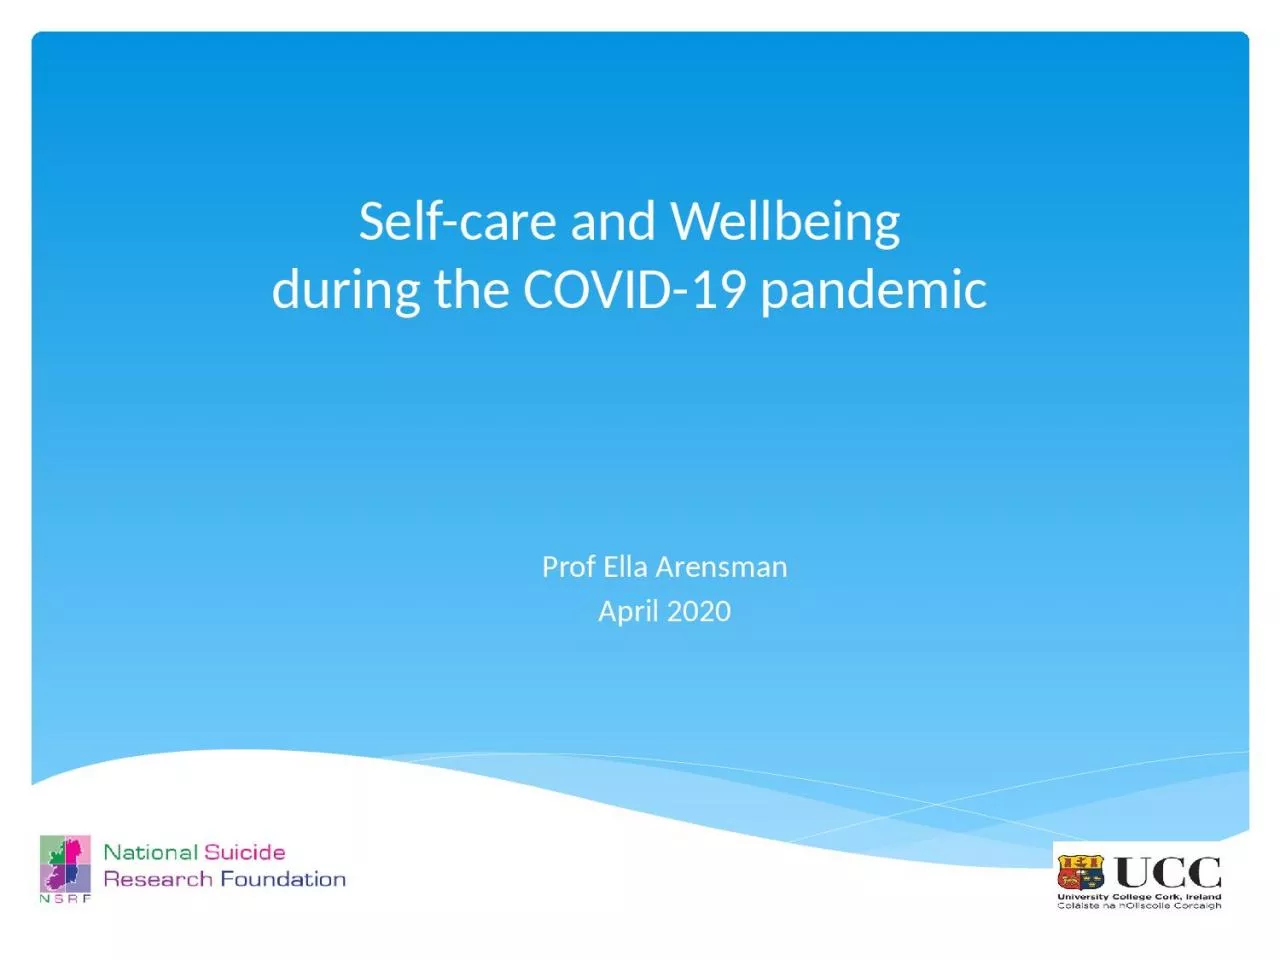 Self-care and Wellbeing during the COVID-19 pandemic